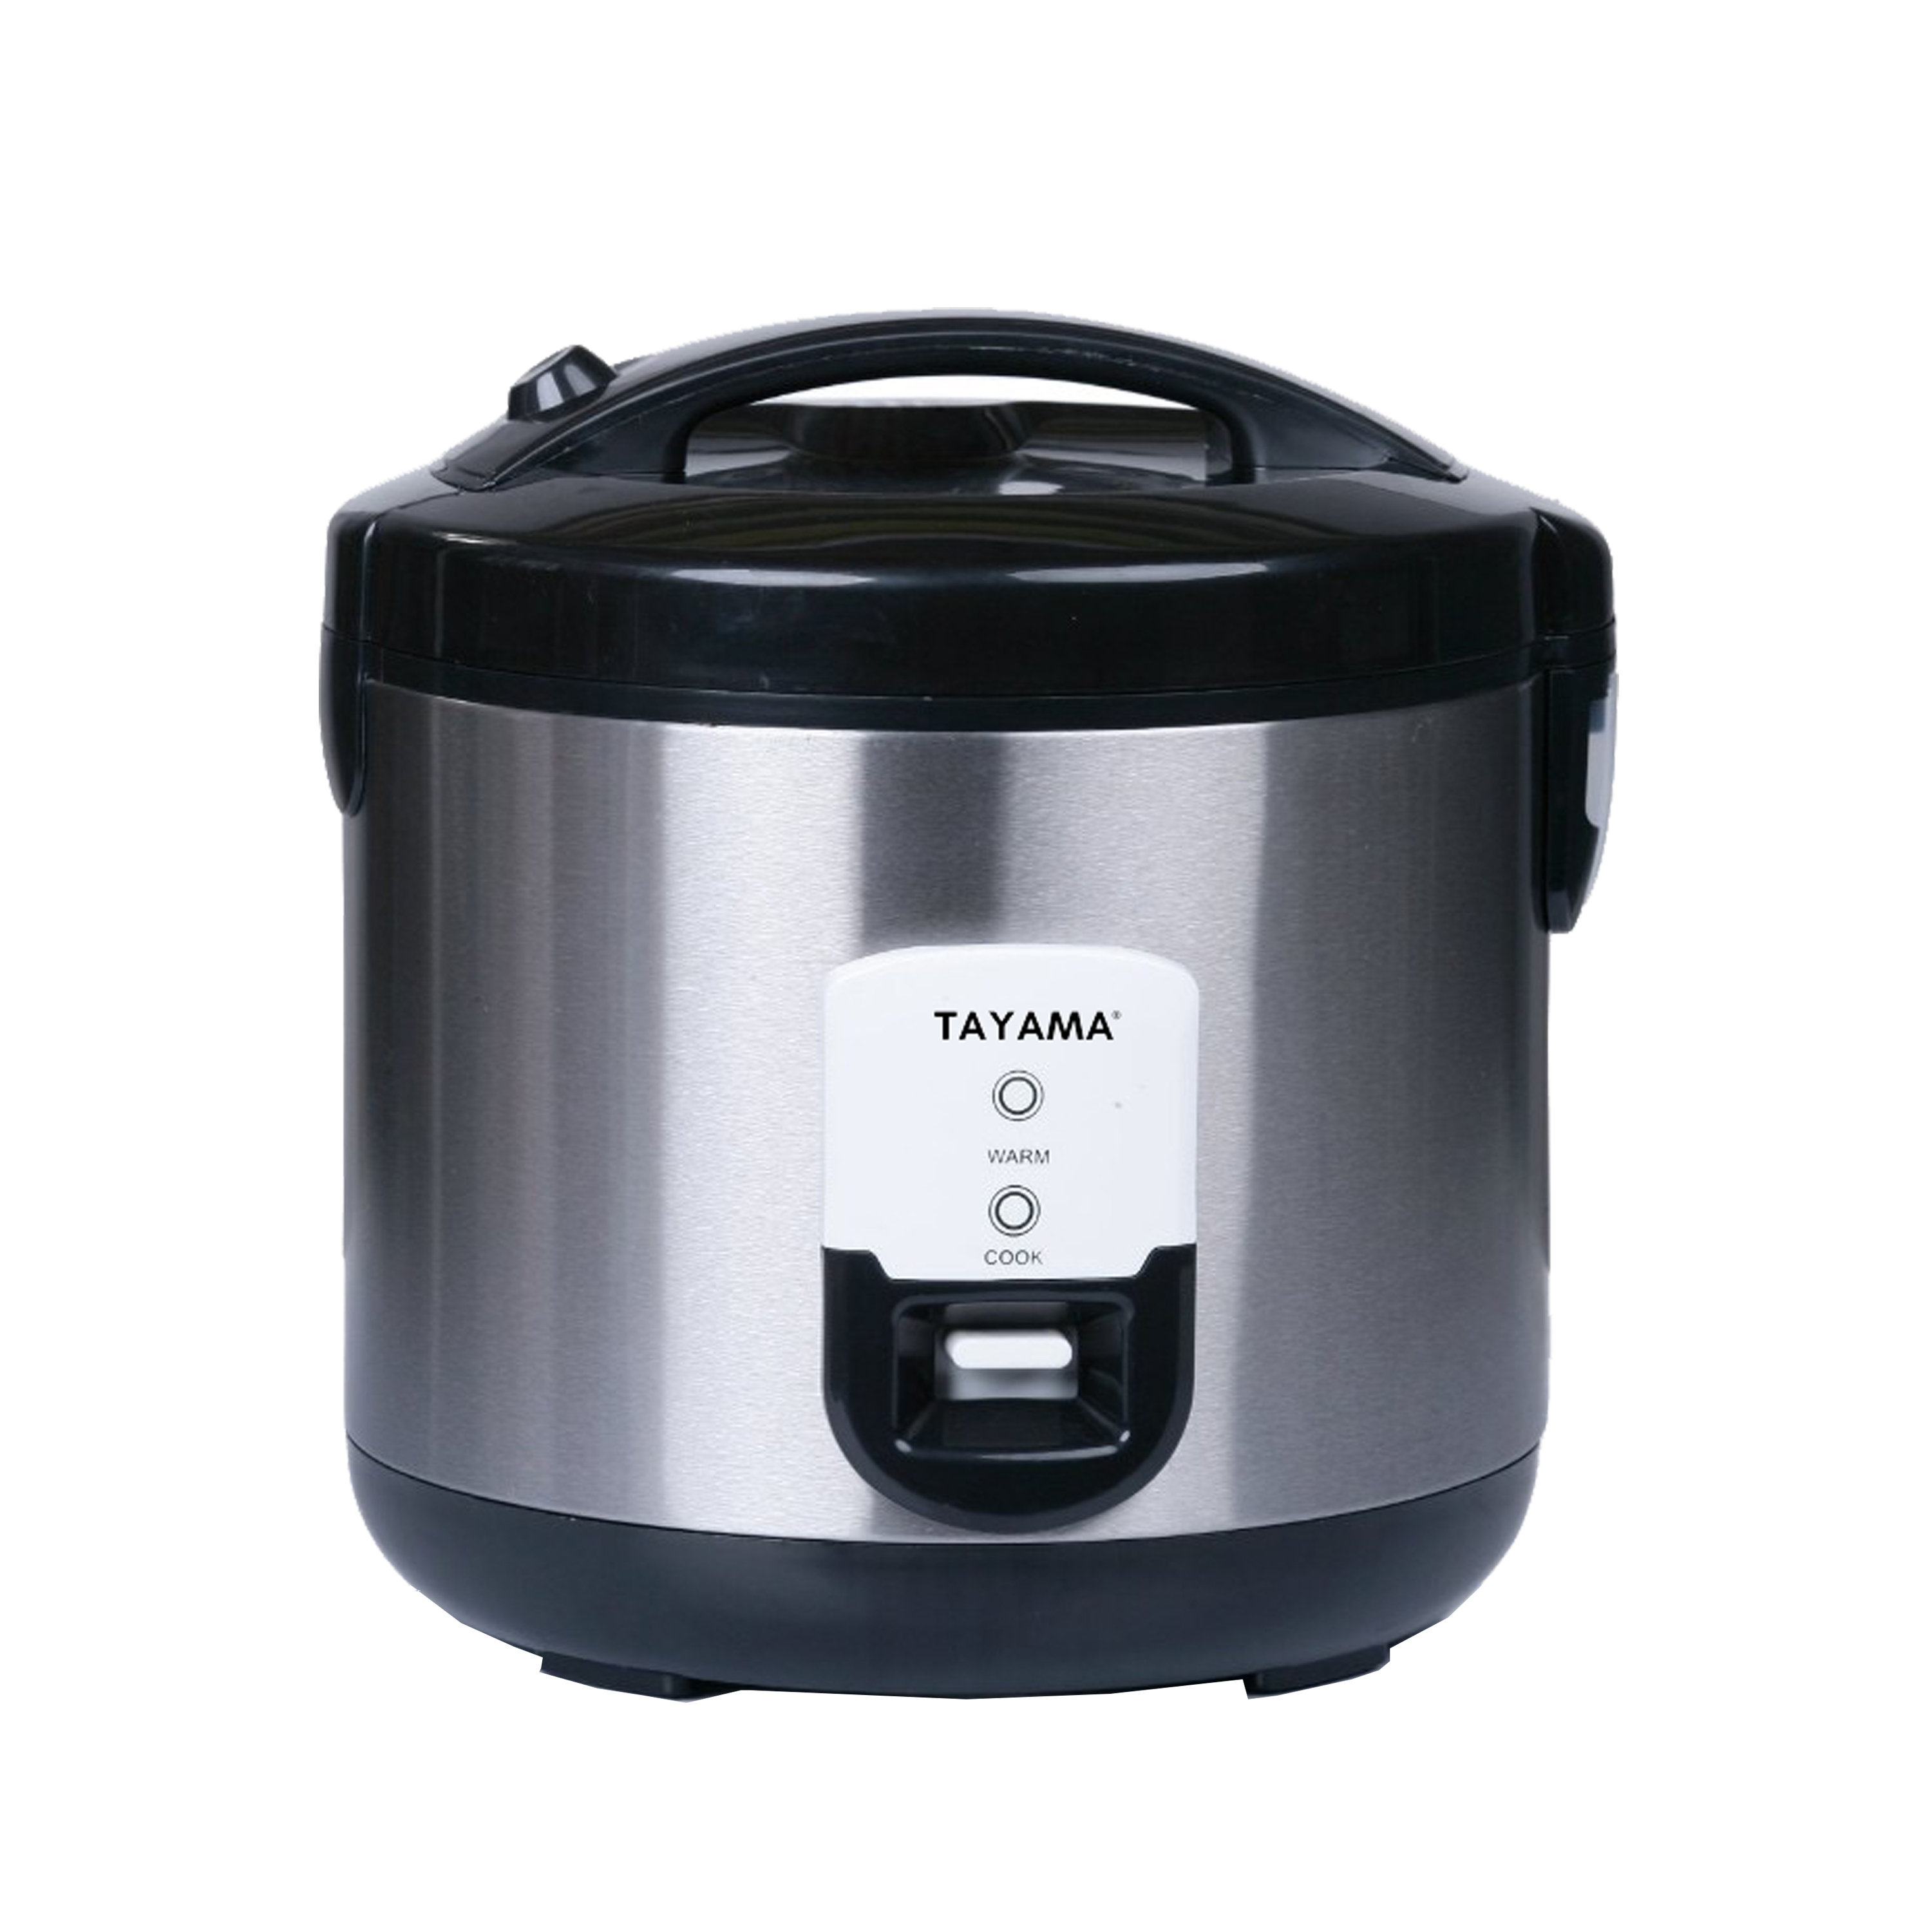 Tayama 20-Cup Rice Cooker with Food Steamer and Stainless Steel Inner Pot